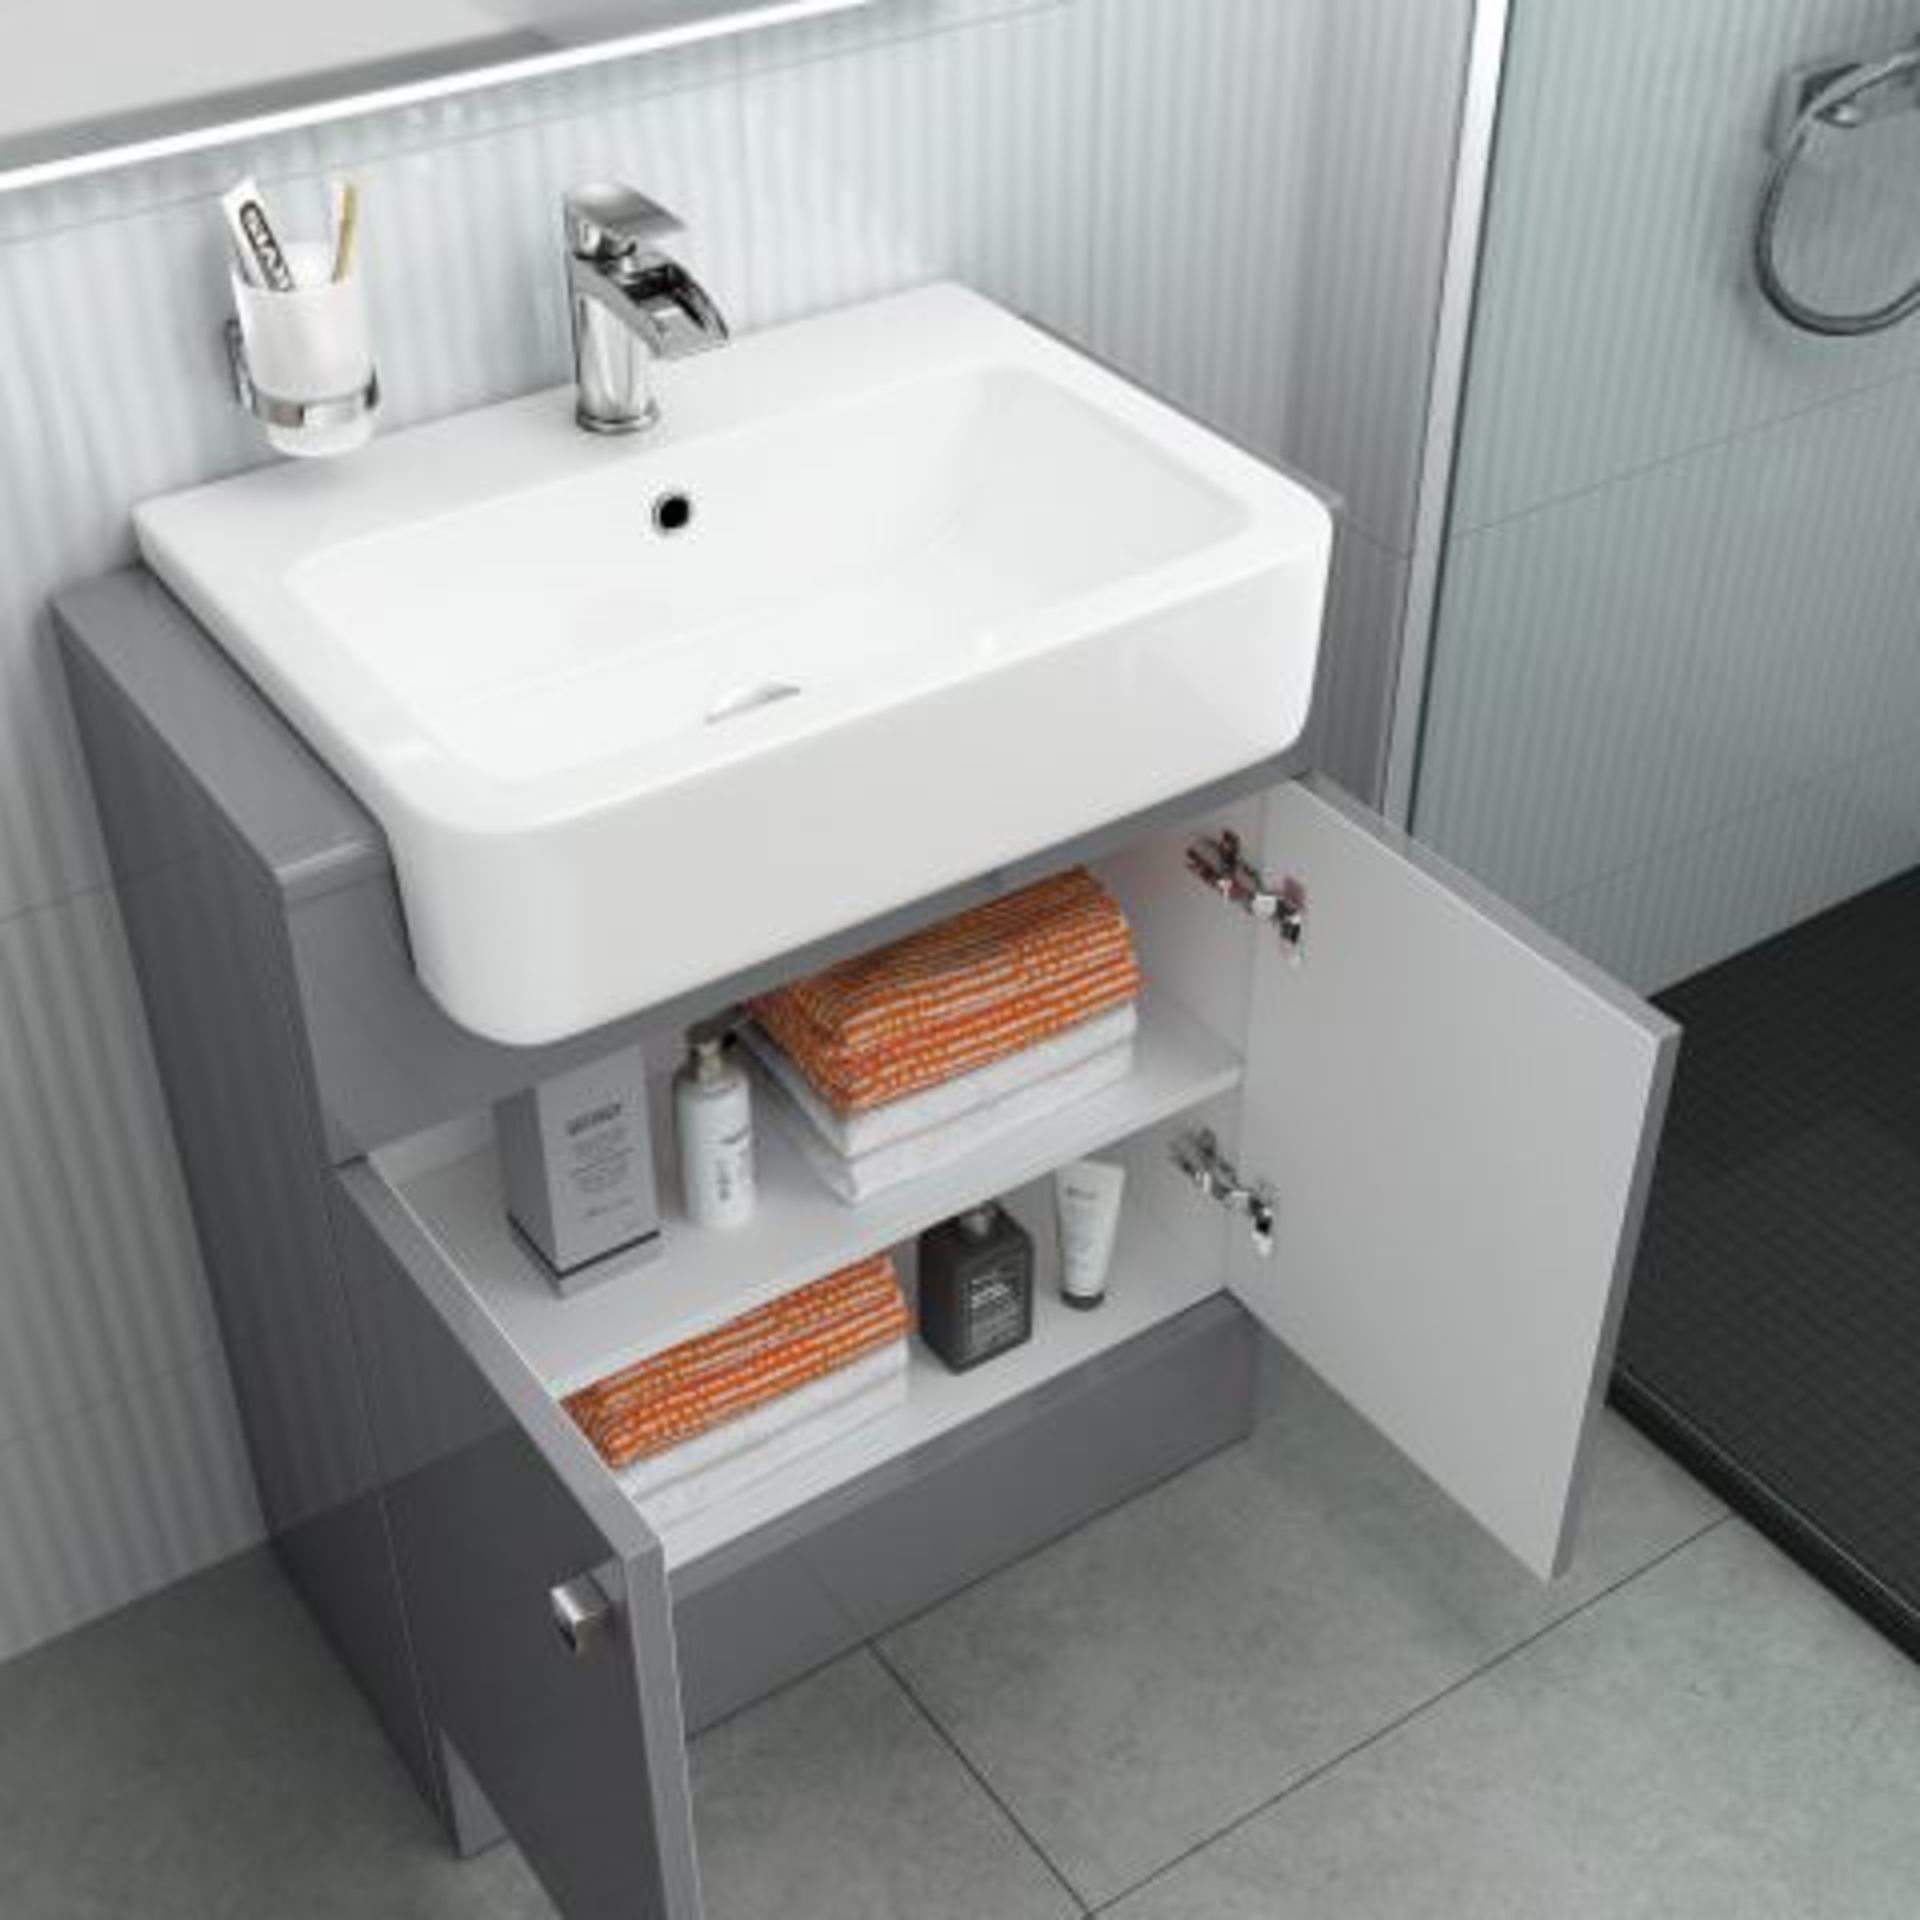 Brand New 660mm Harper Gloss Grey Basin Vanity Unit - Floor Standing. RRP £749.99. COMES COMPLETE WI - Image 3 of 3